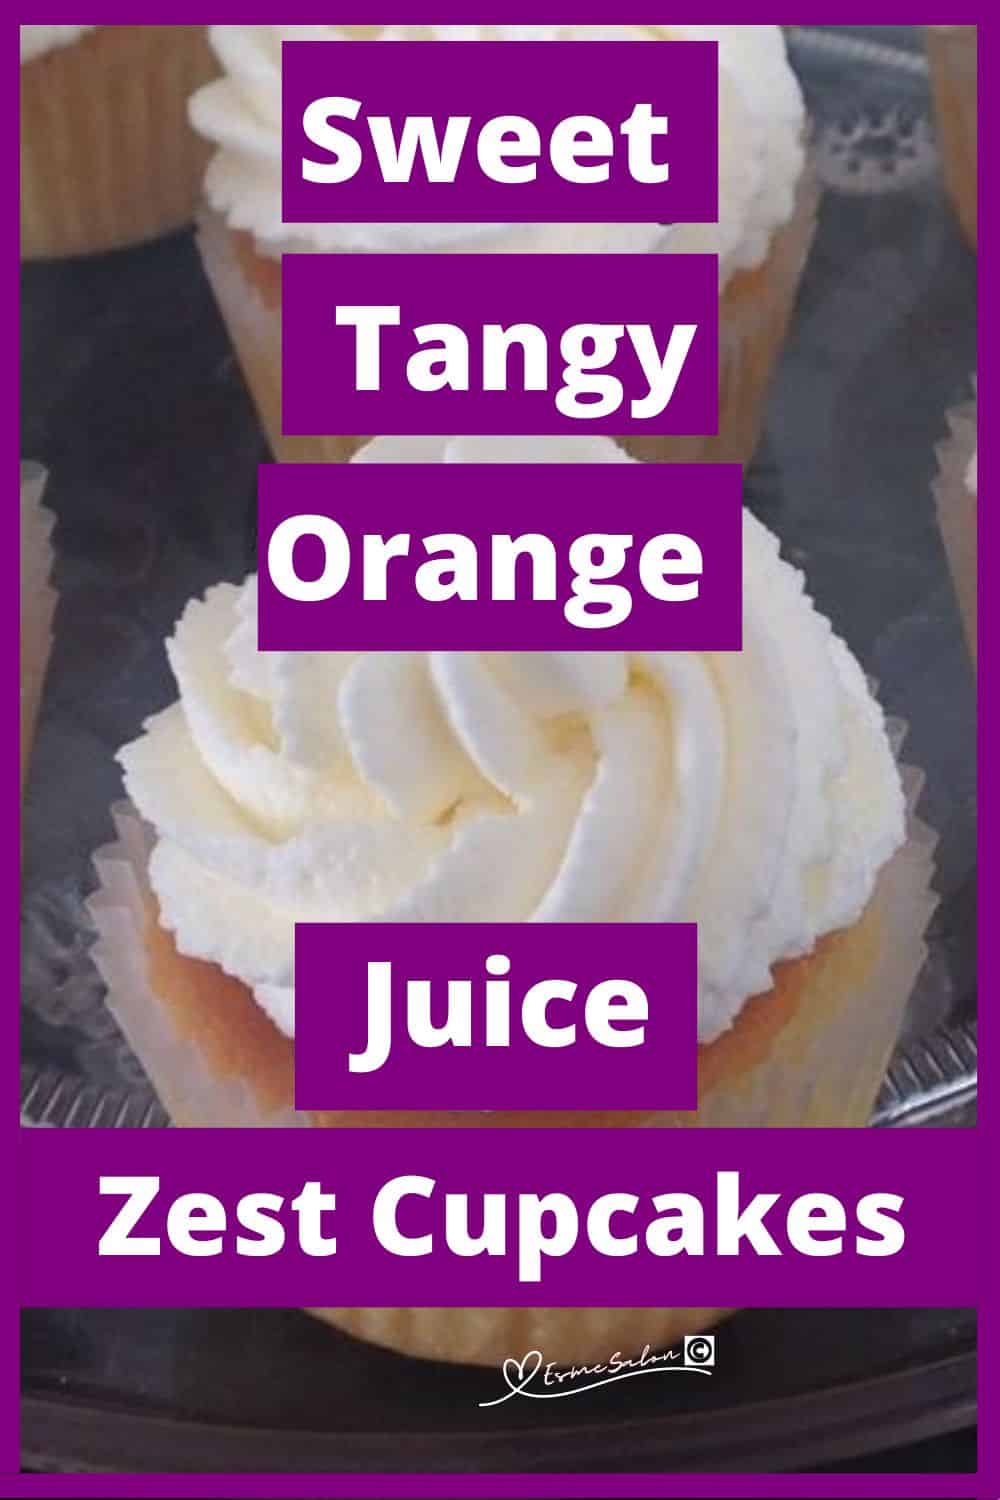 an image of a batch of Orange Juice and Zest Cupcakes with white frosting